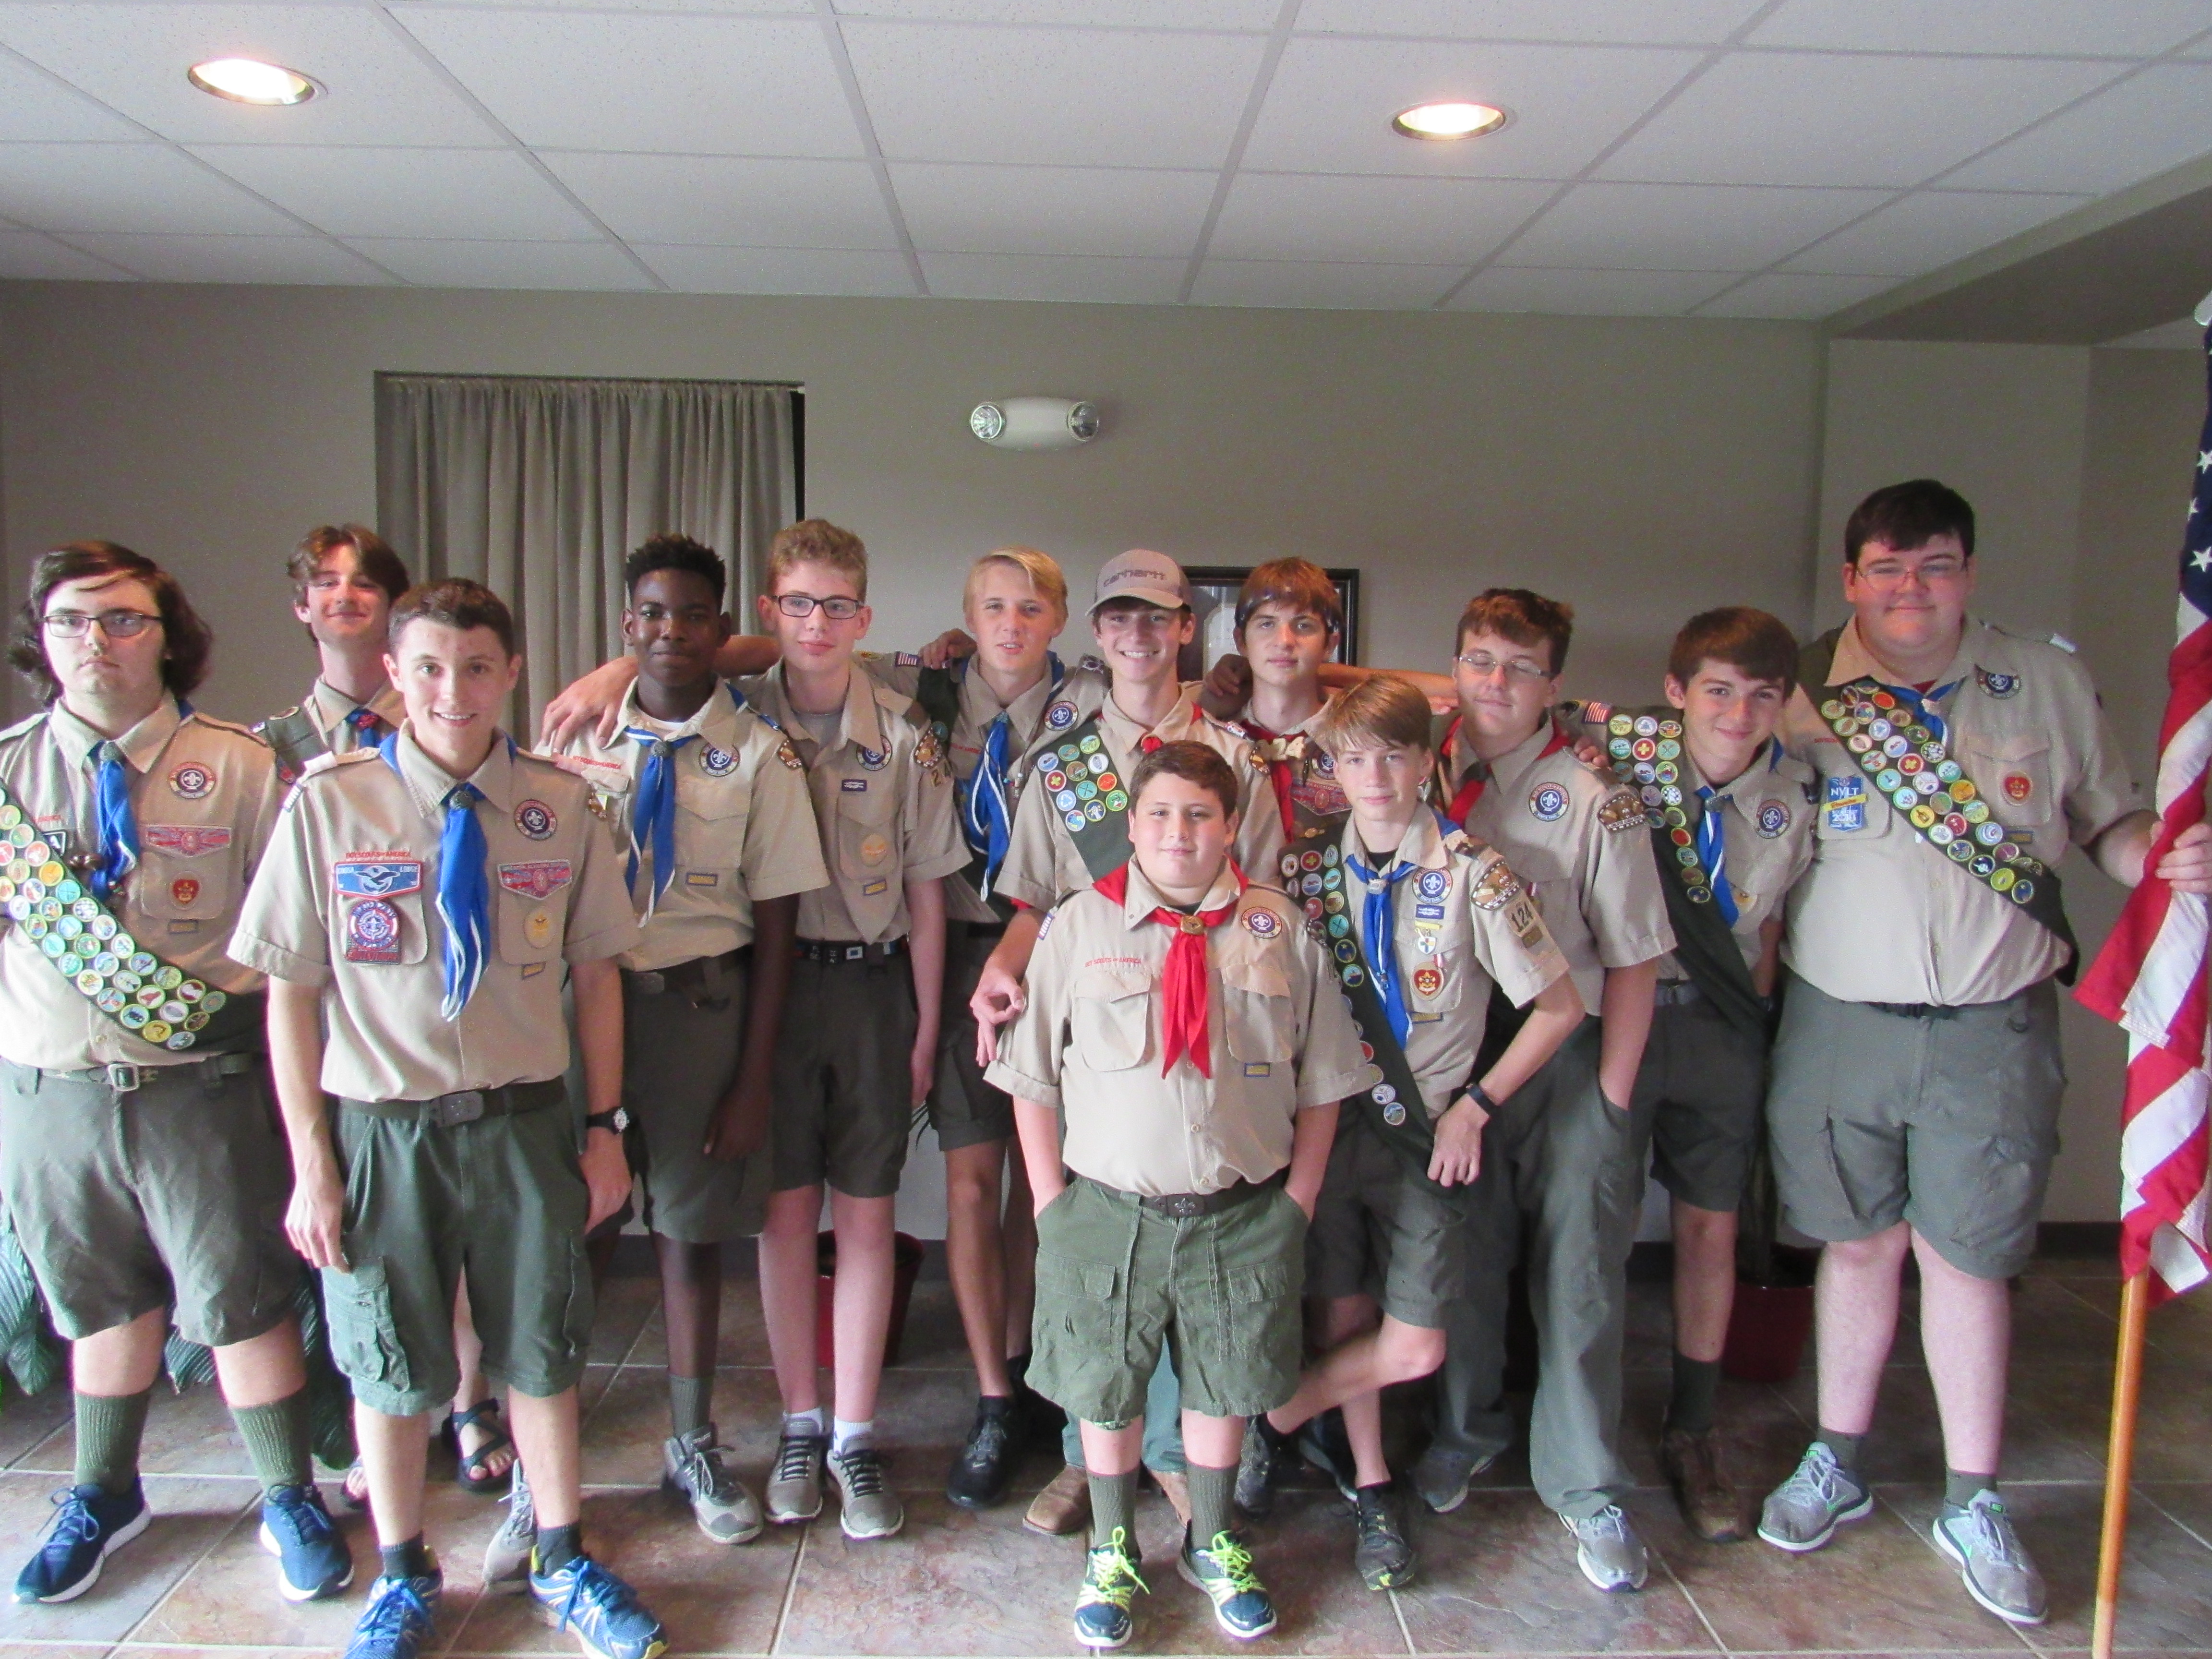 50th Anniversary Celebration of Boy Scout Troop 124 in Clay